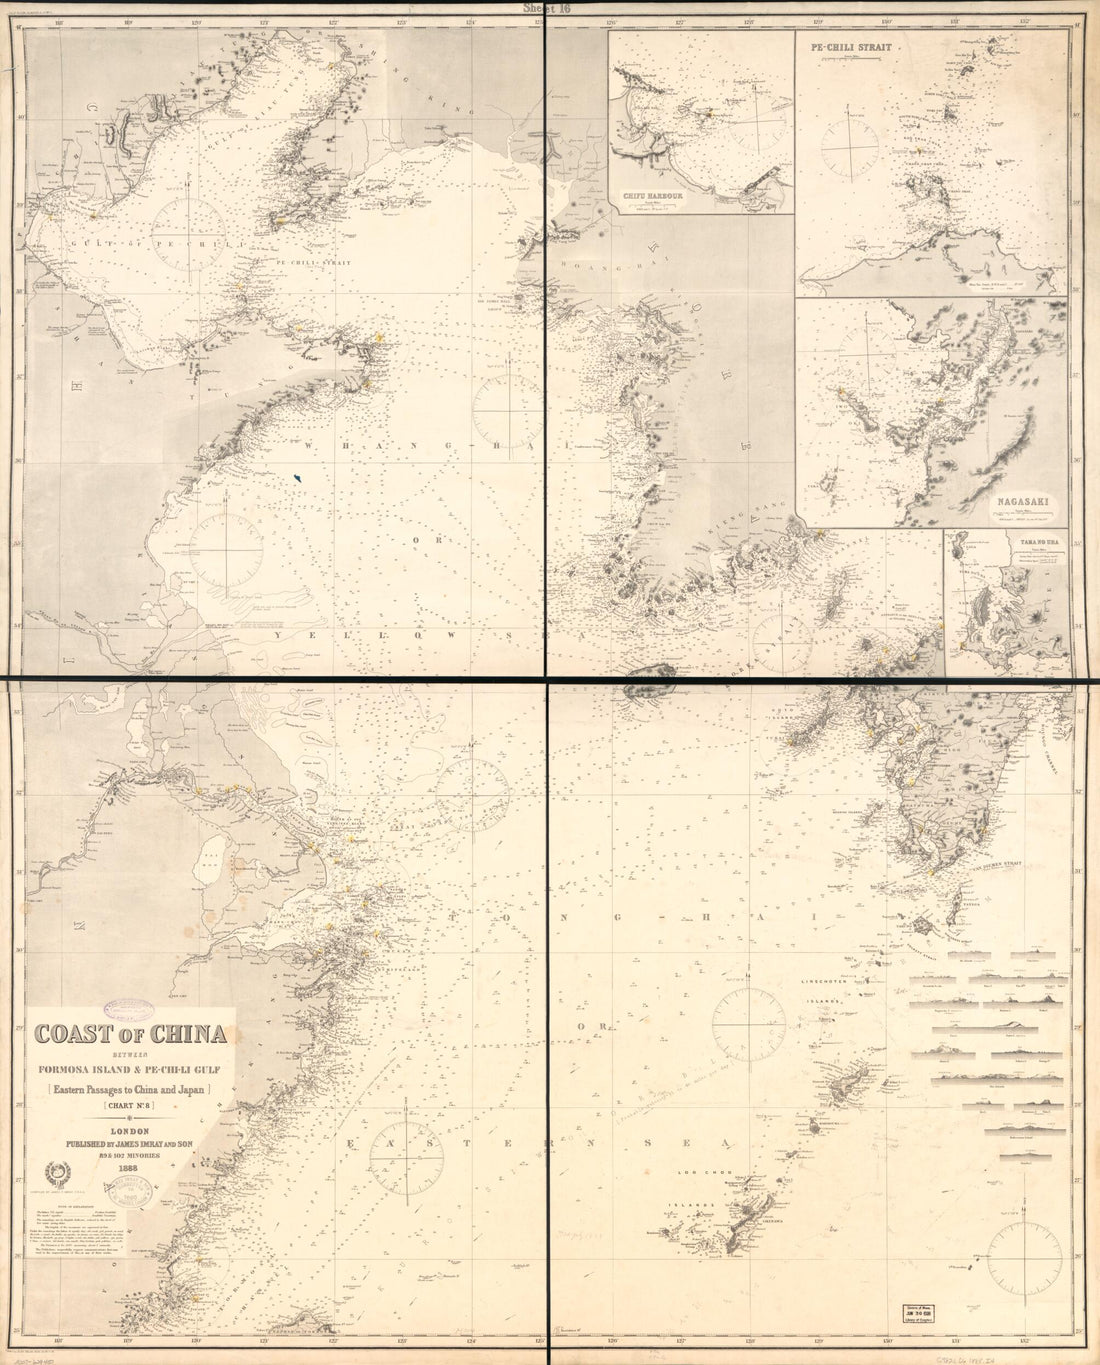 This old map of Chi-Li Gulf : Eastern Passages to China and Japan : Chart No. 8 from 1888 was created by James Imray in 1888